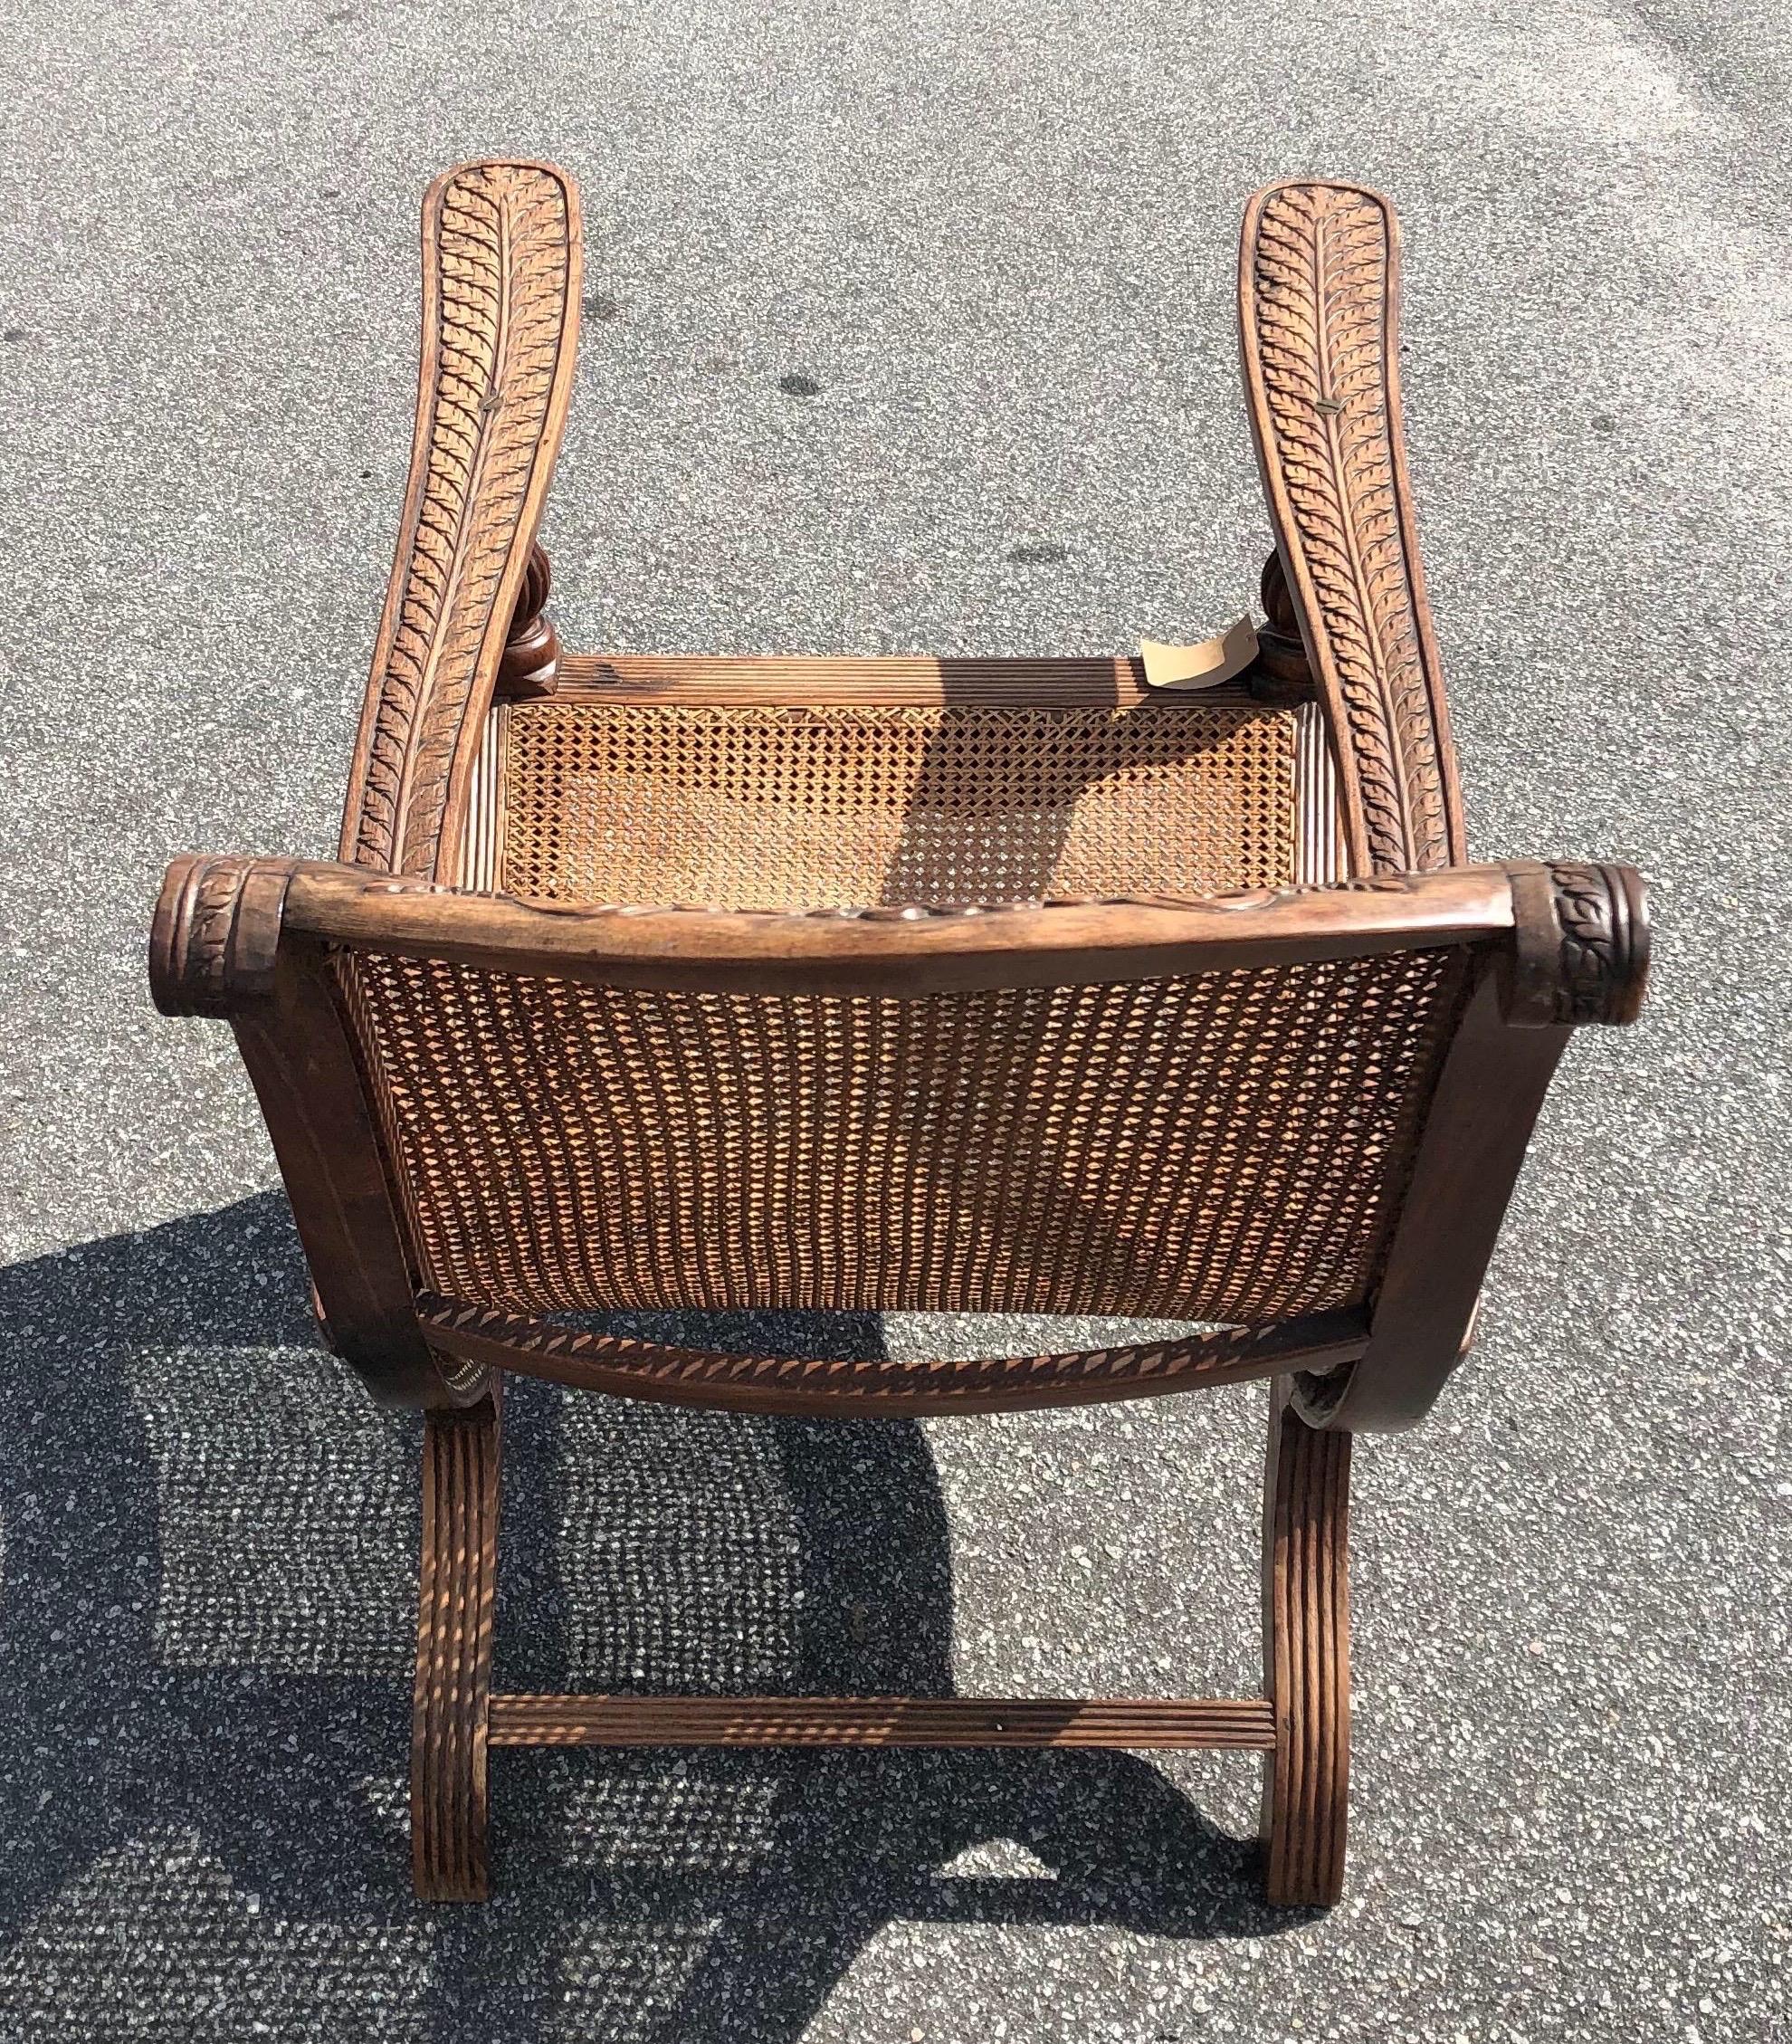 planters chair for sale